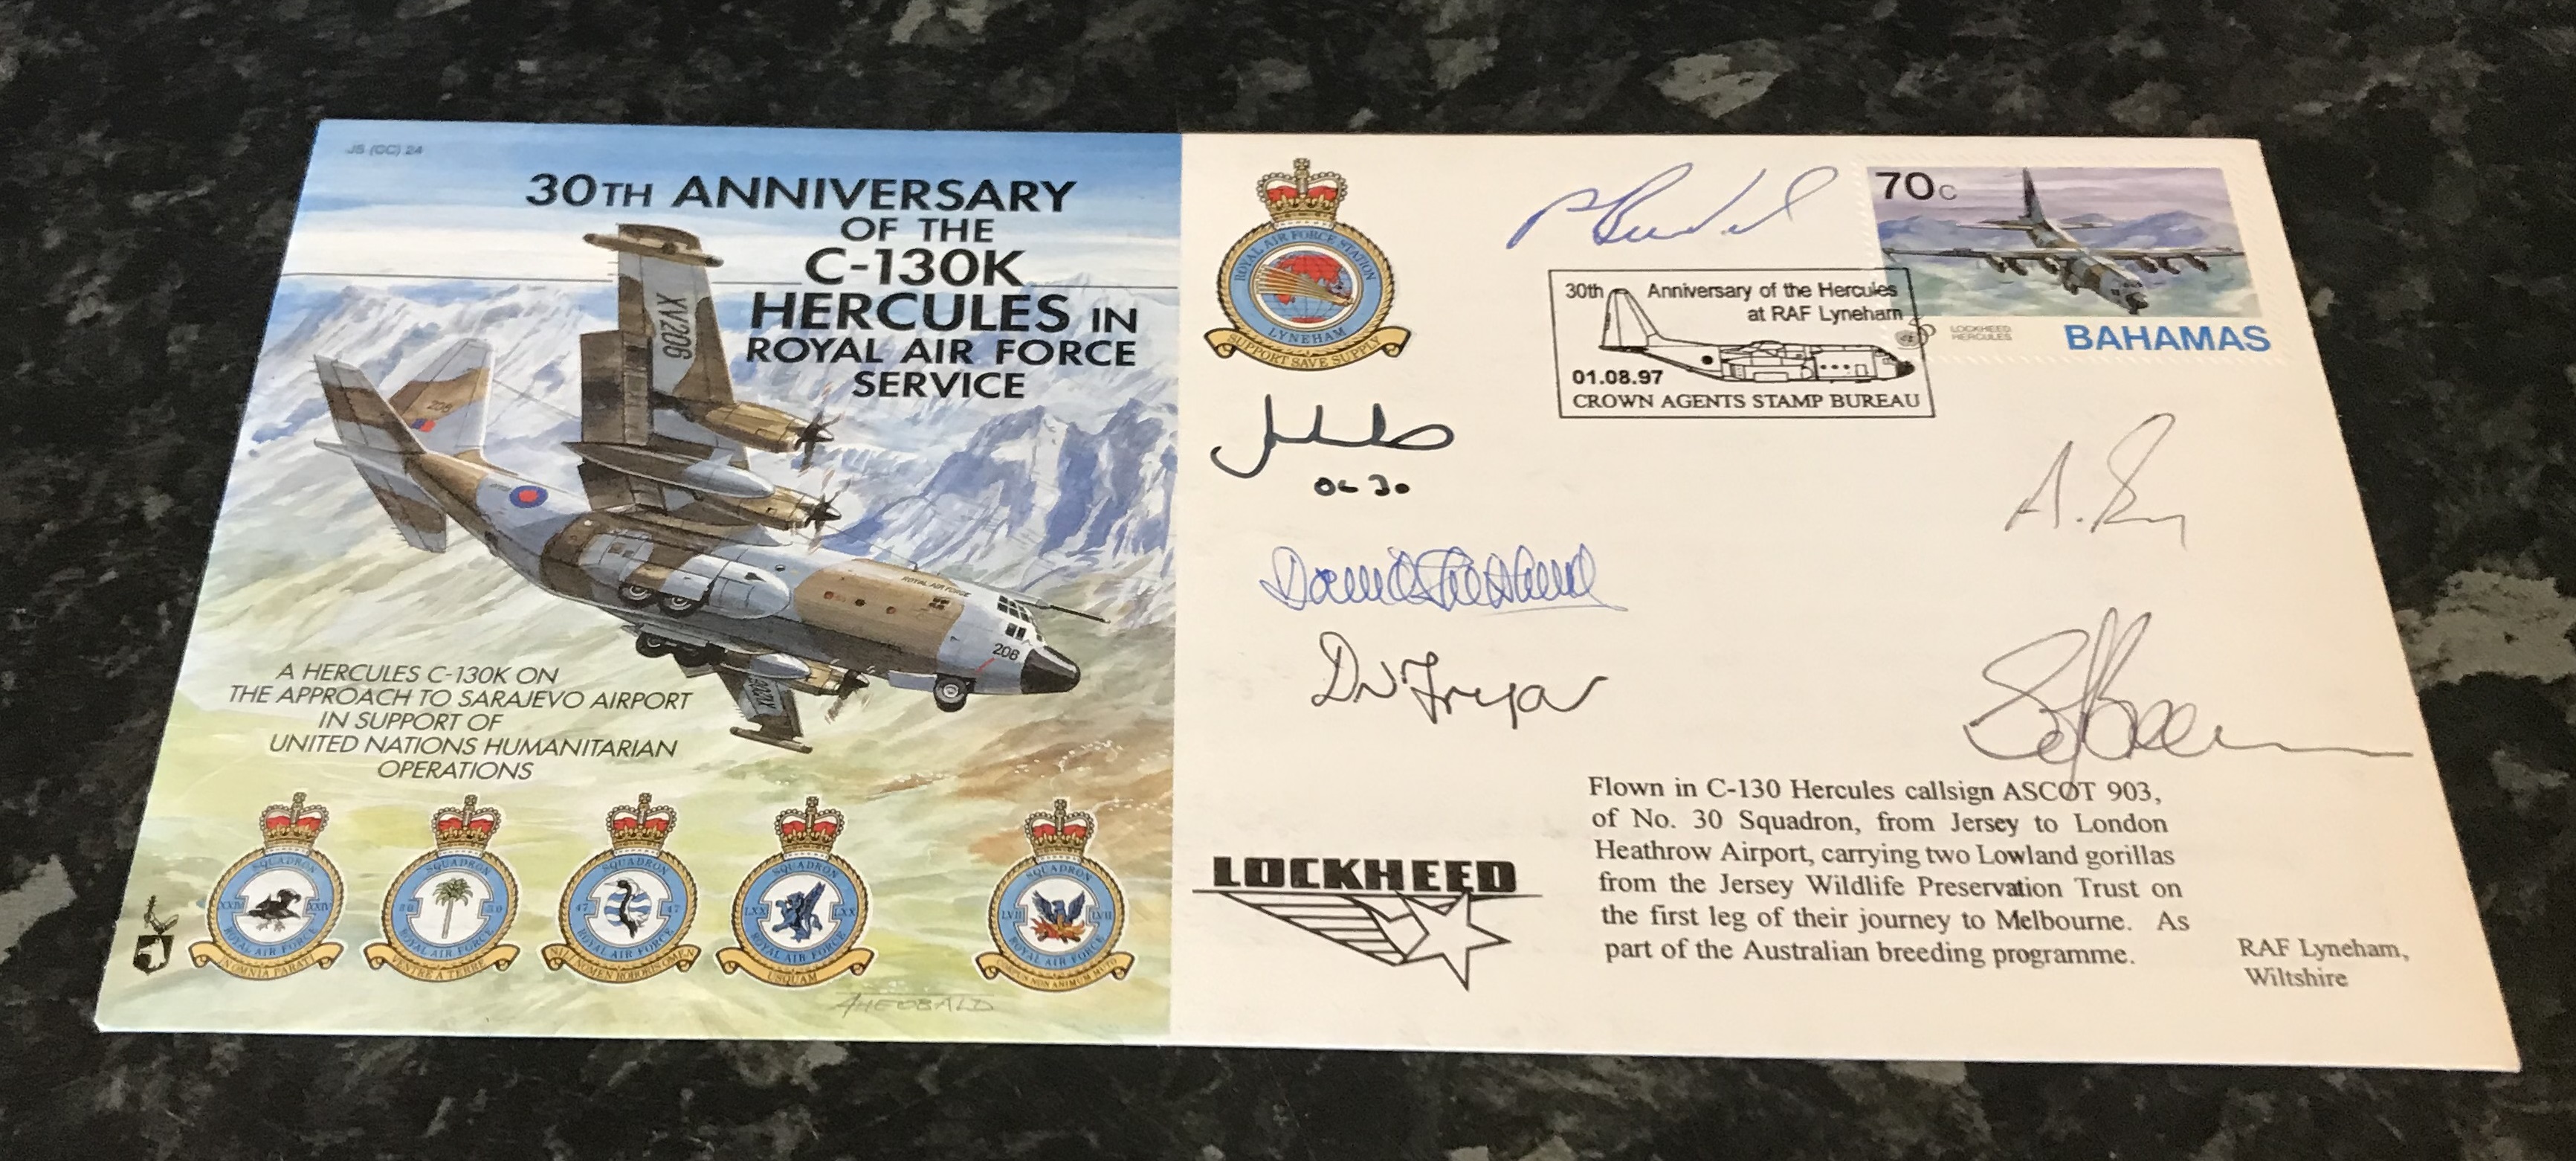 30th Anniversary of The C 130K Hercules in Royal Air Force Service cover, flown in a C 130